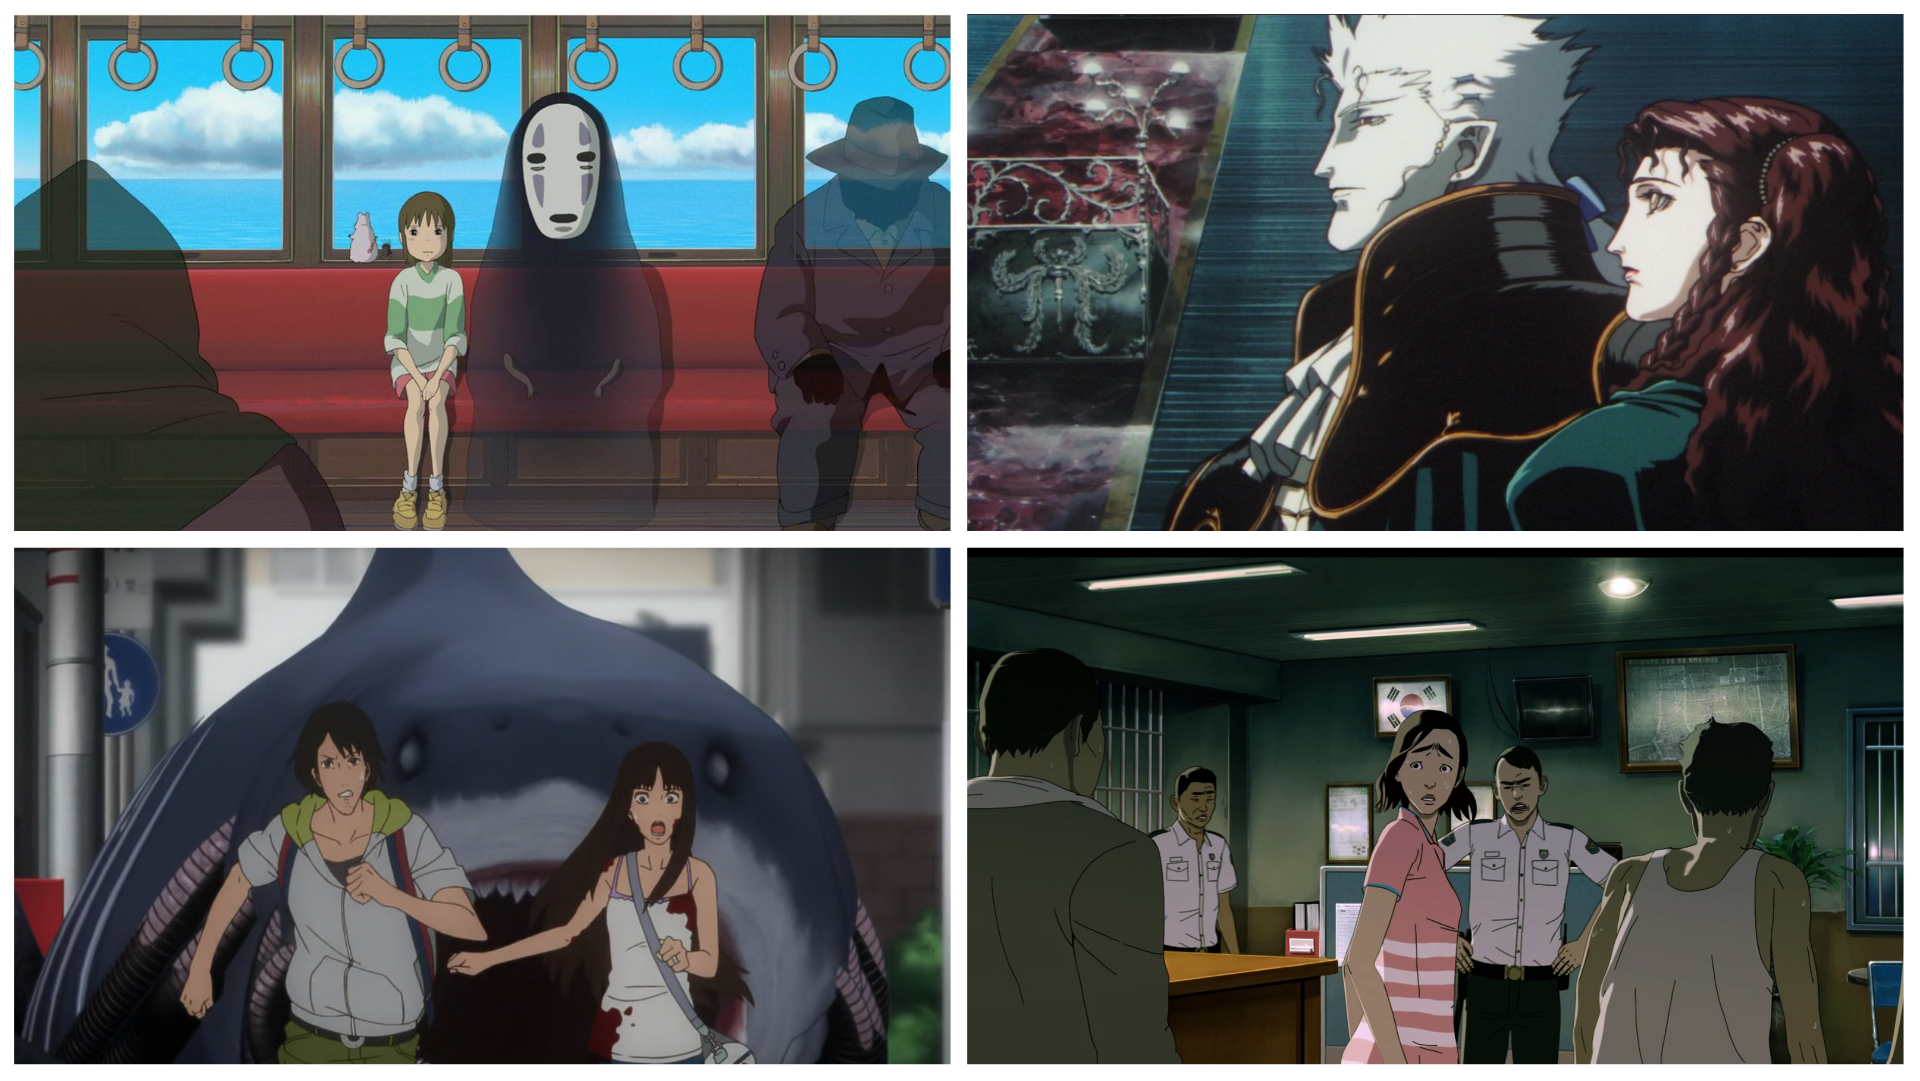 Best Anime films to watch this coming Halloween – Ranked